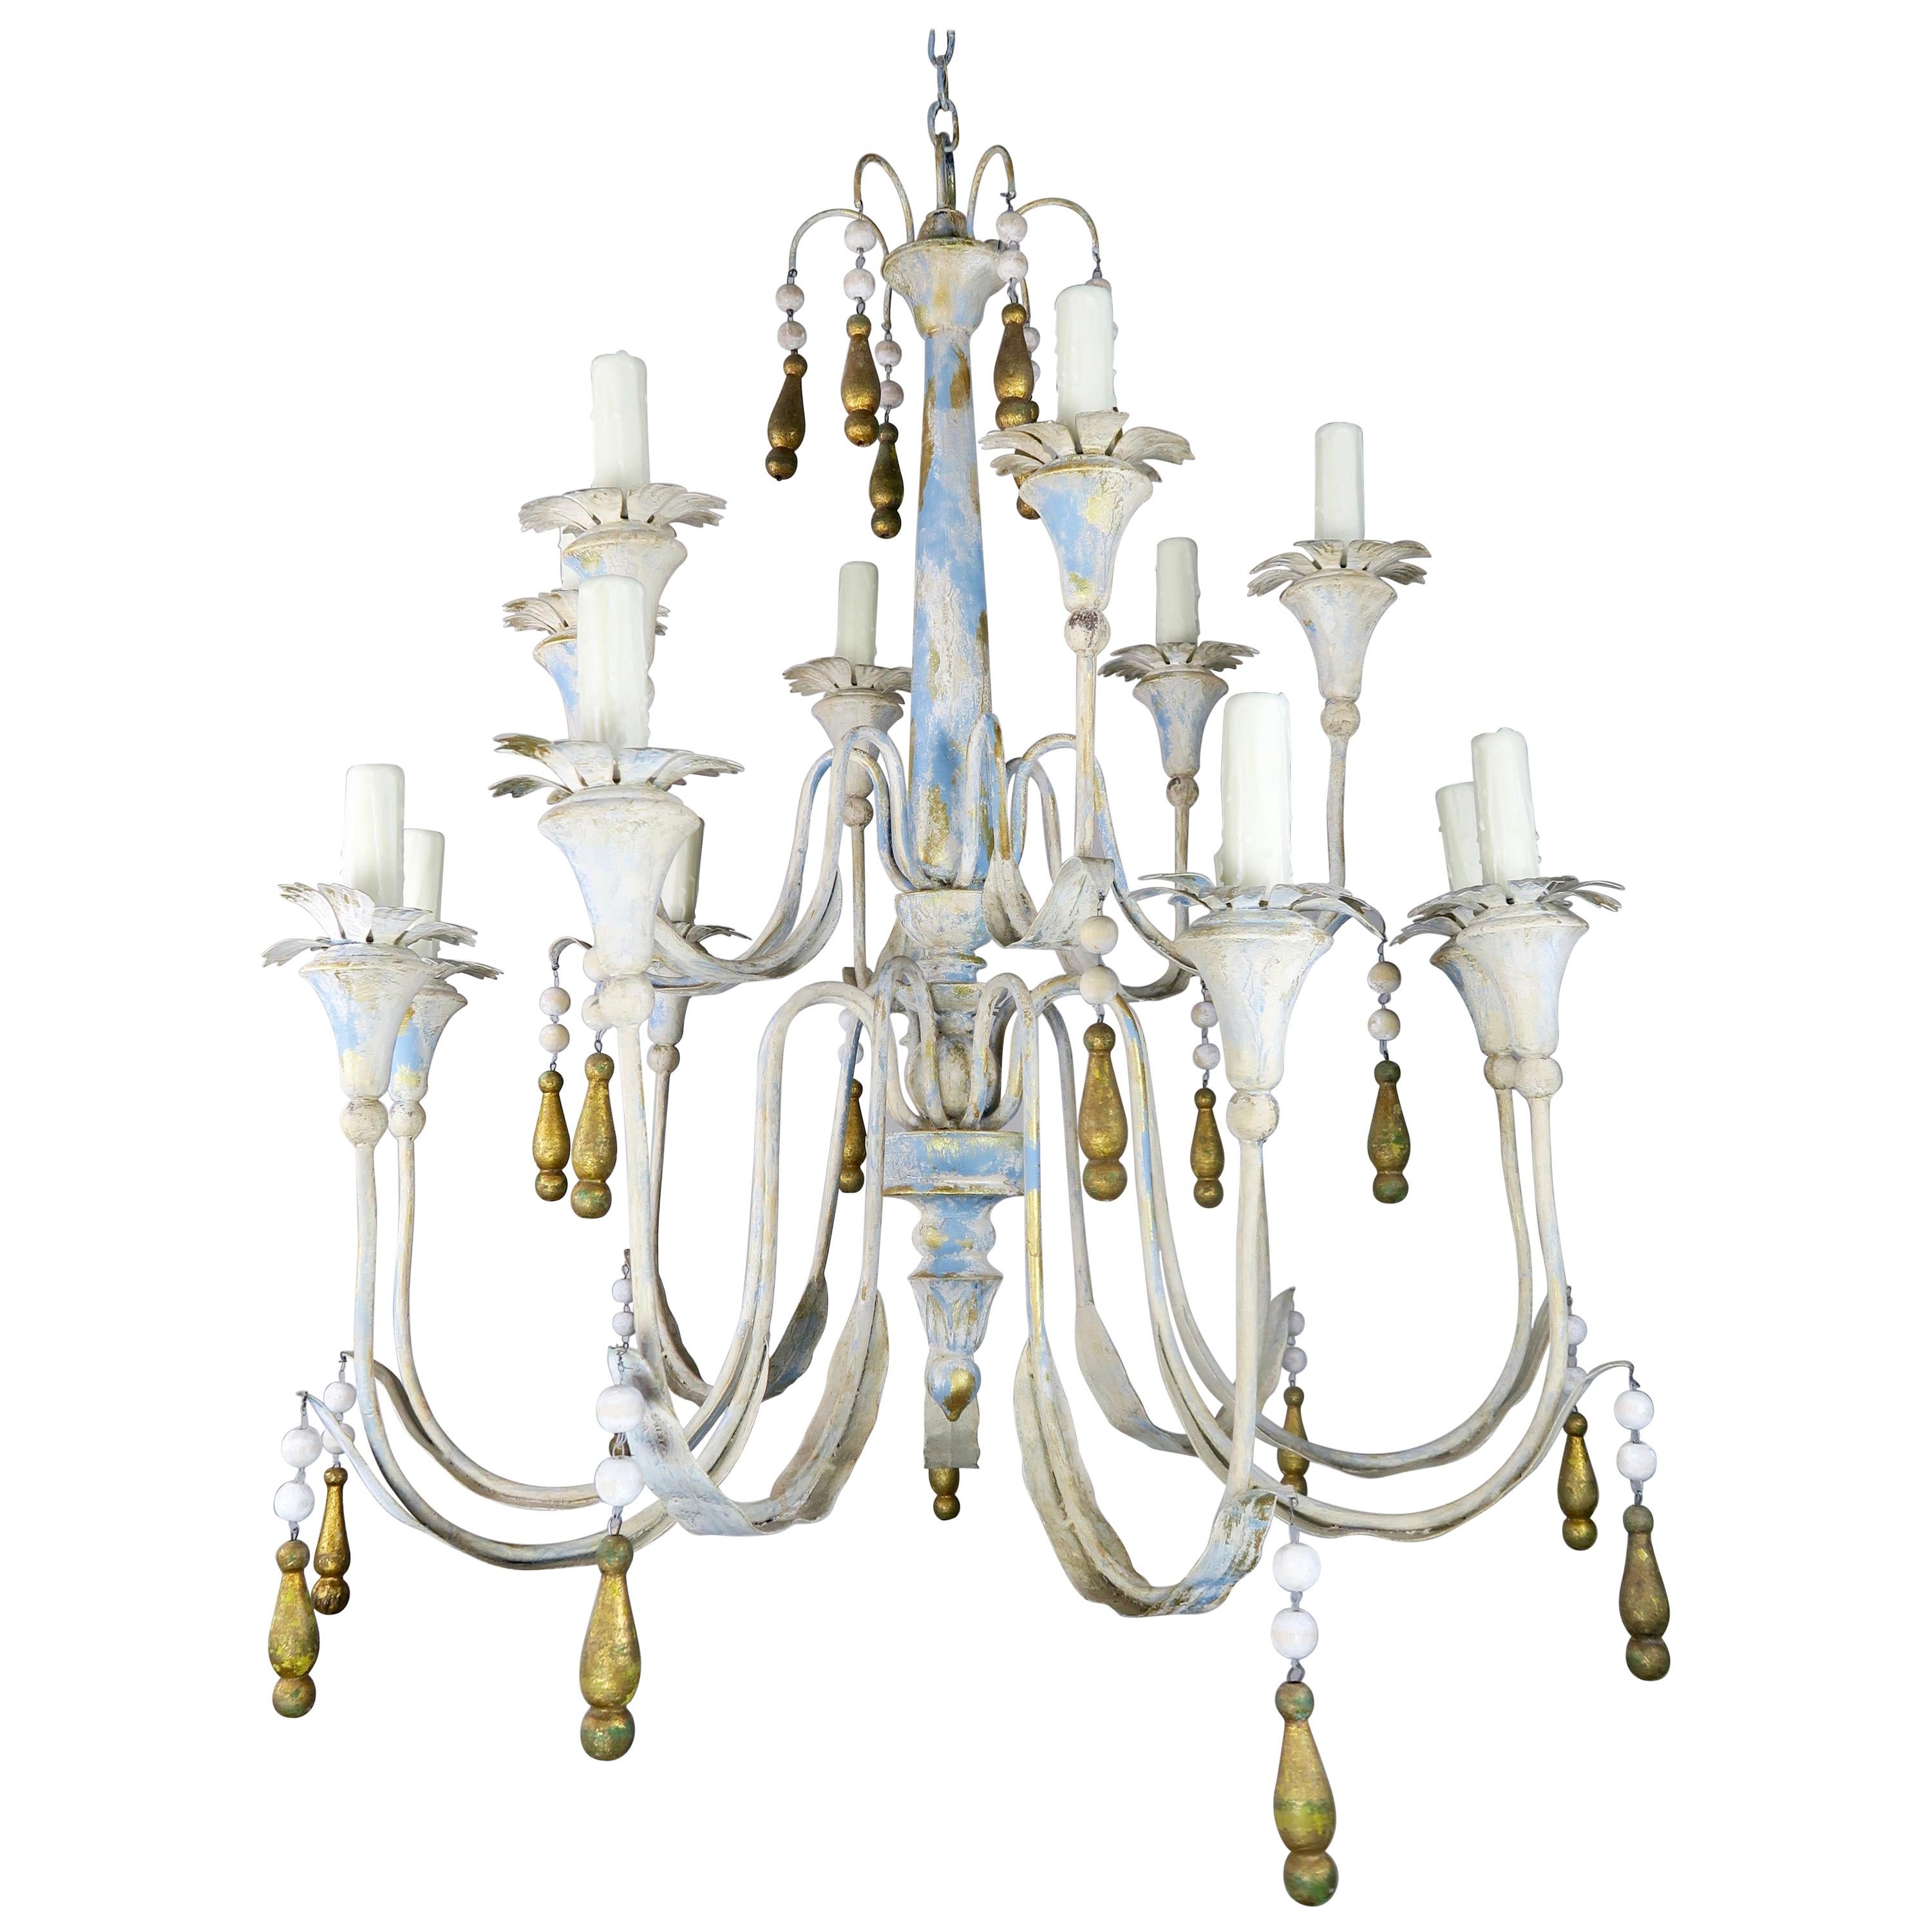 Painted Metal Chandelier with Gilt Tassels